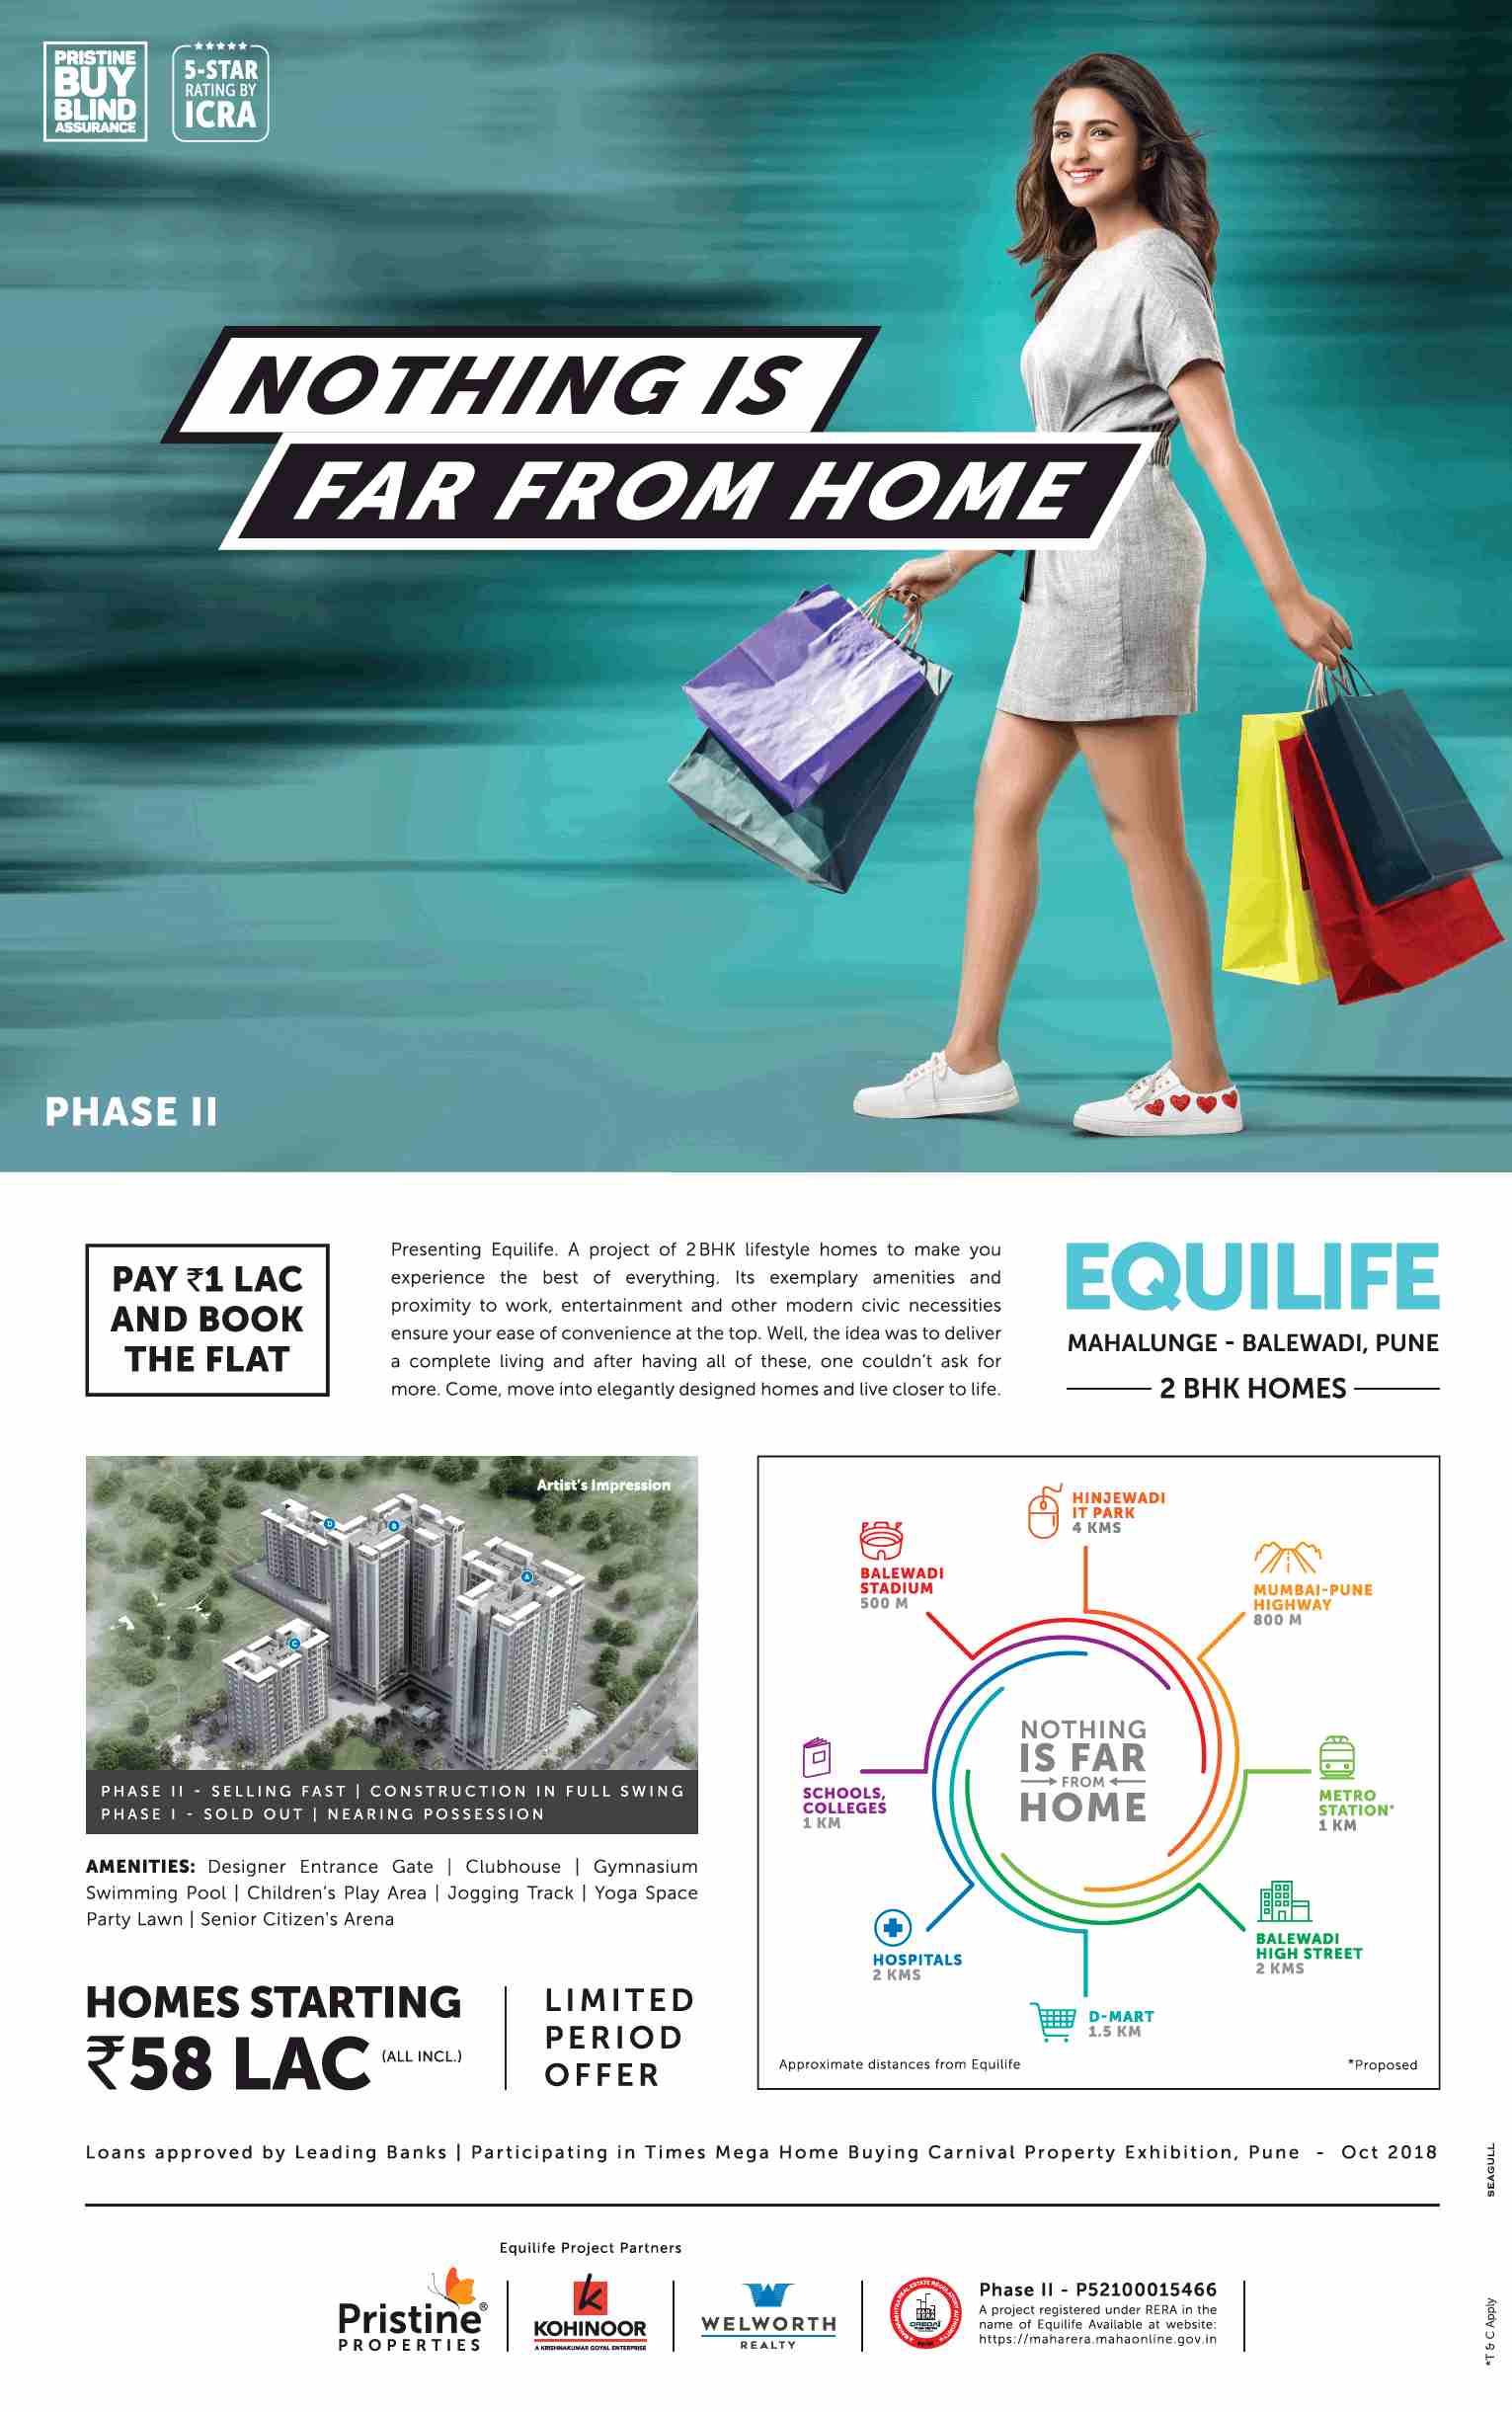 Pay 1% and book your home at Pristine Equilife Homes in Pune